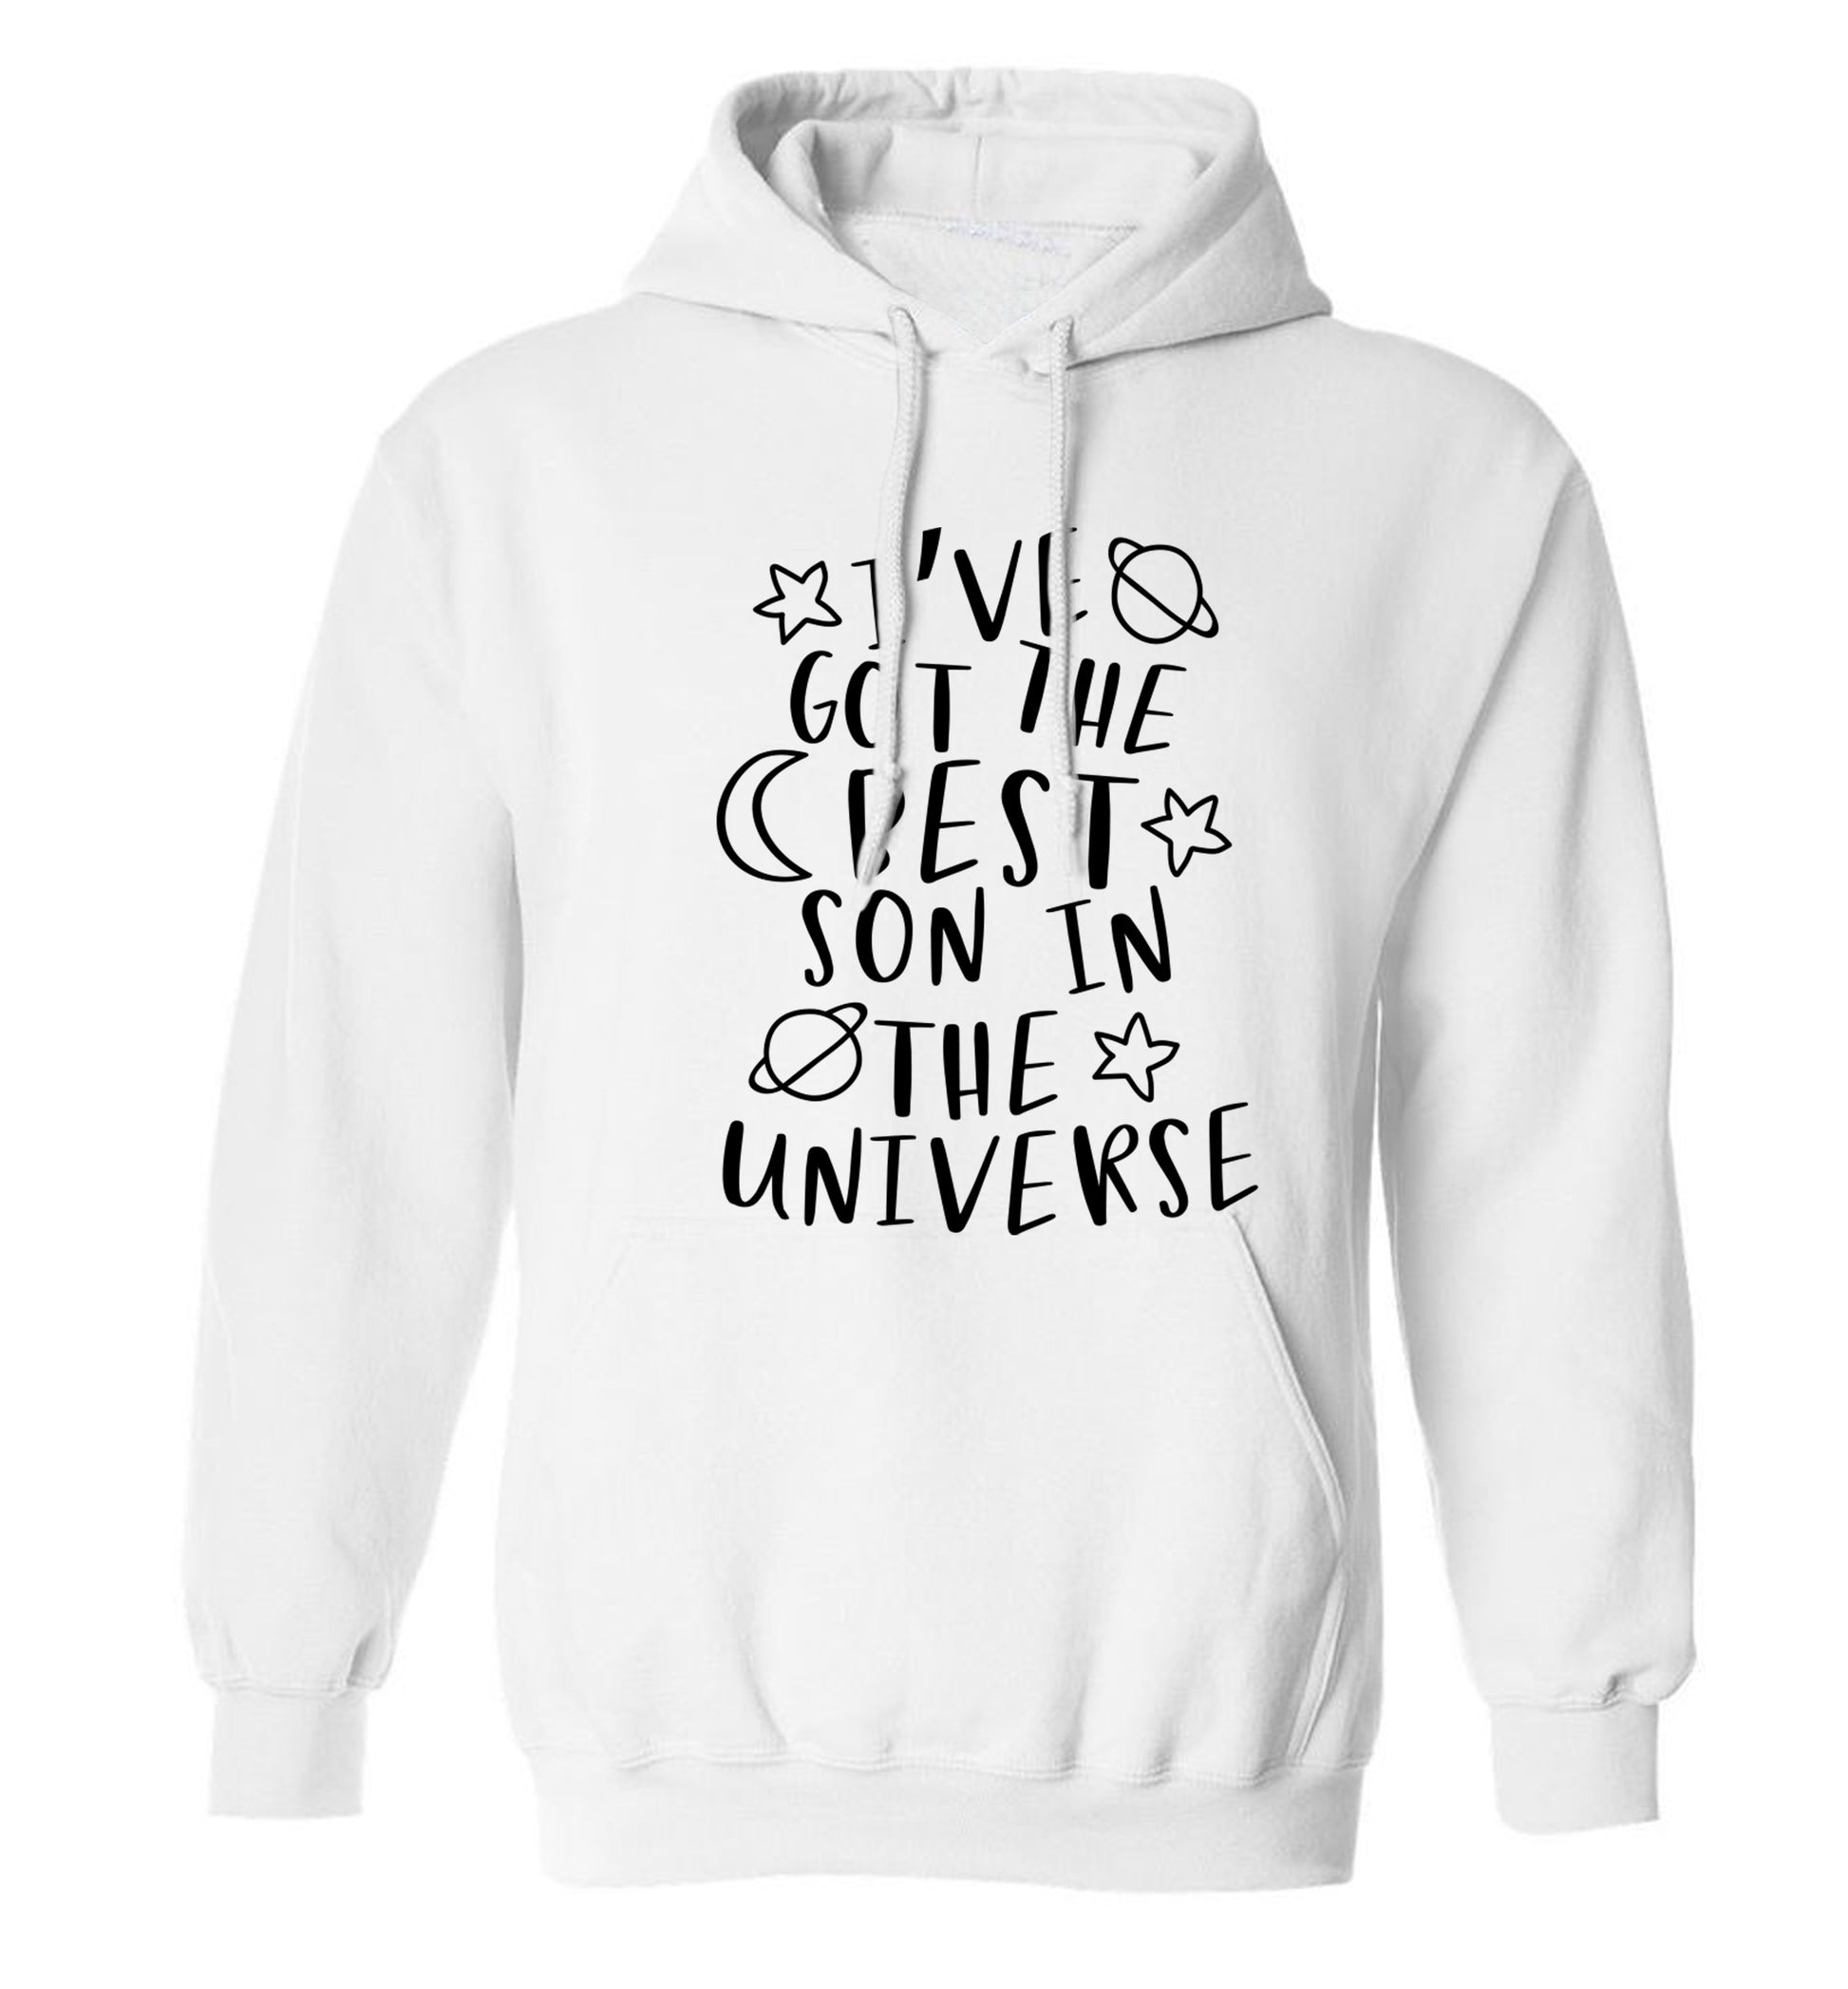 I've got the best son in the universe adults unisex white hoodie 2XL